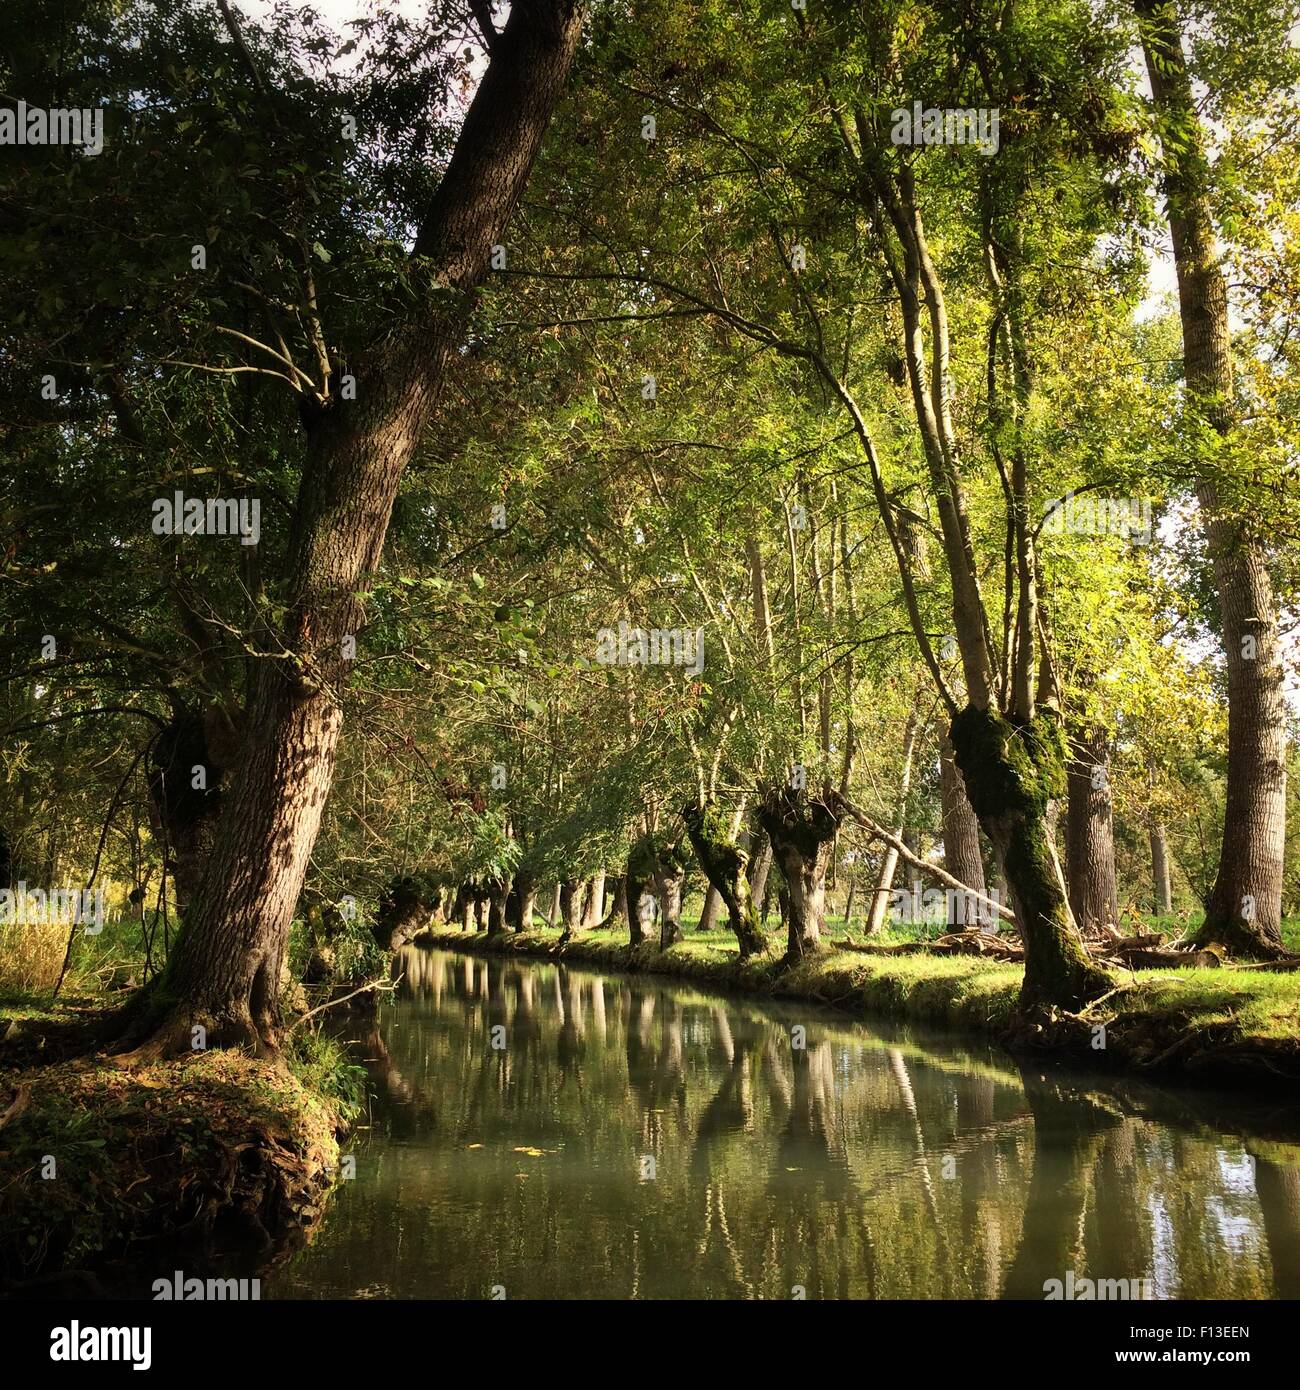 Reflection of trees in a canal, Marais Poitevin, France Stock Photo